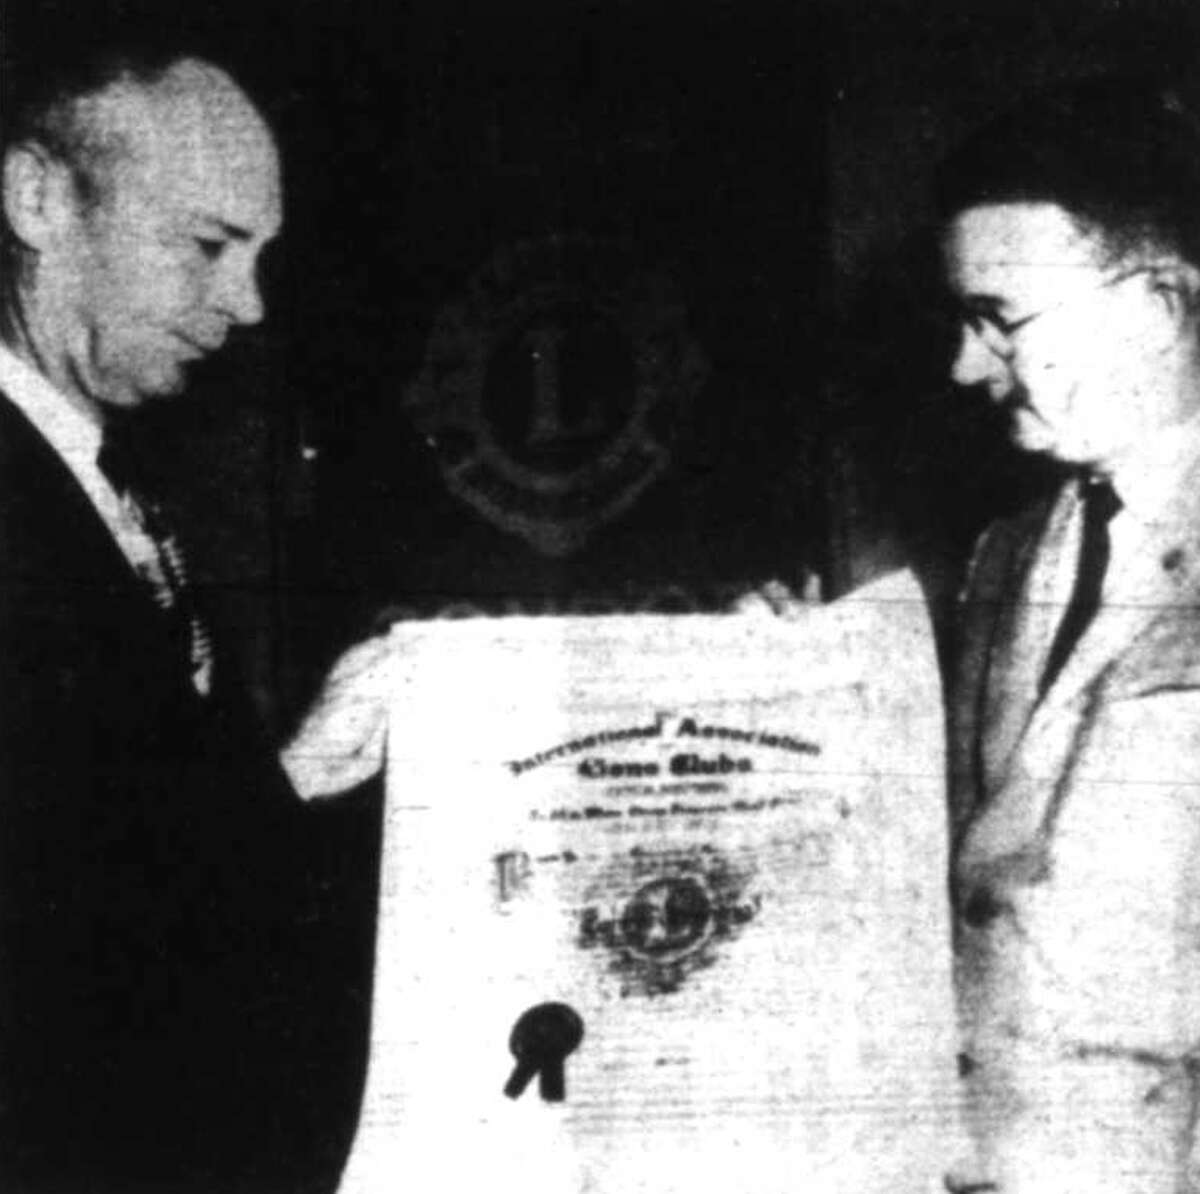 Frank Zachry, left, first president of the Conroe Evening Lions Club, is presented a charter for the group by Robert Lundy, Lions Club International District Governor on Jan. 30, 1958.